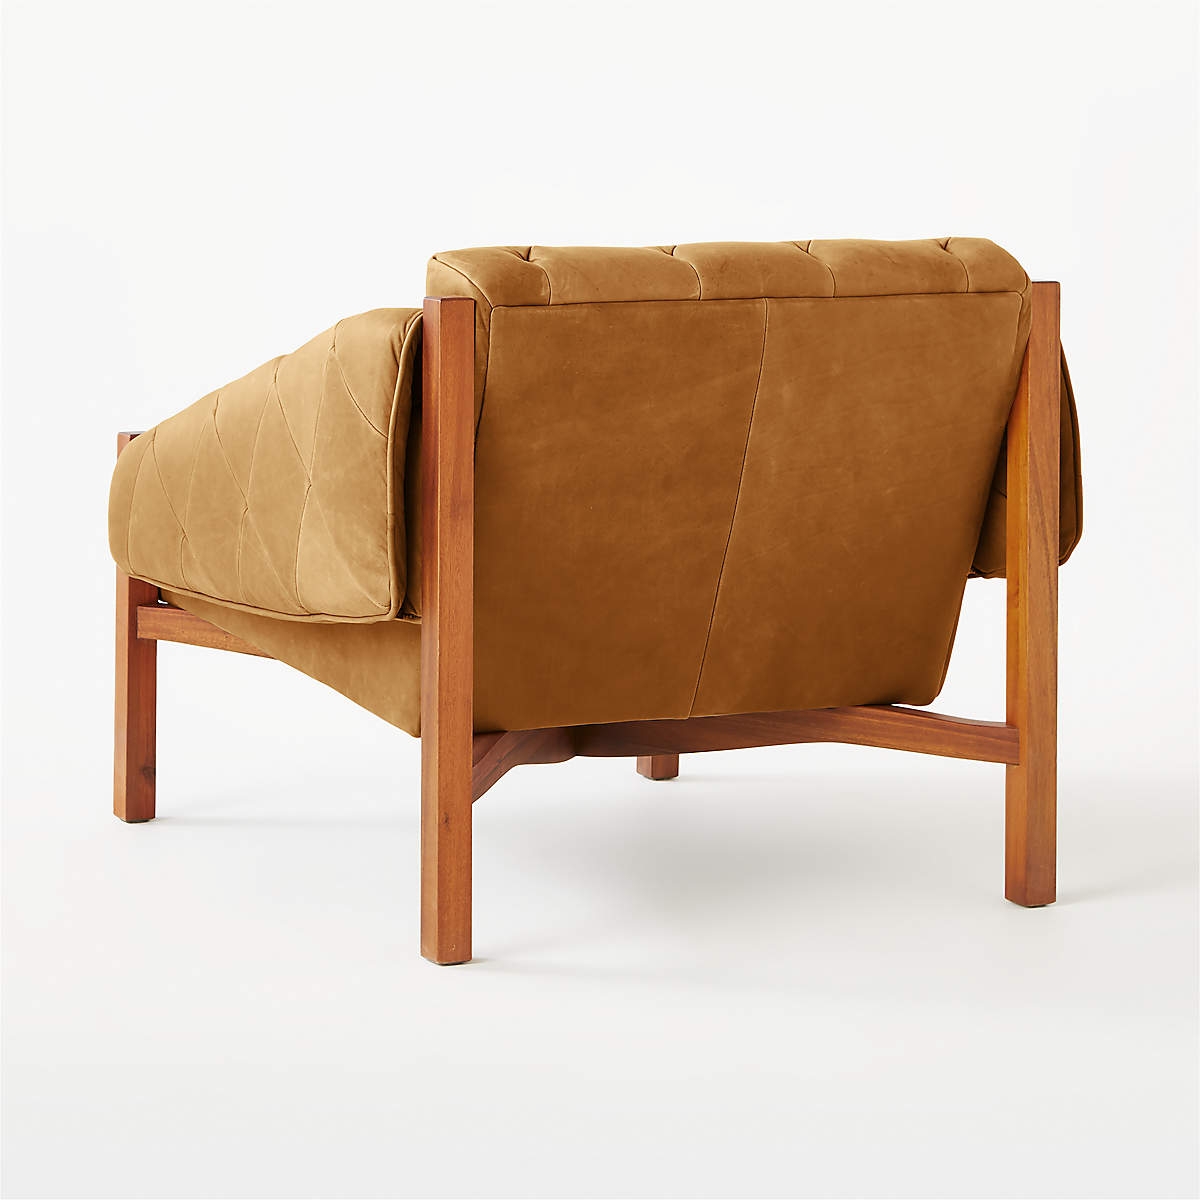 Abruzzo Brown Leather Tufted Chair - Image 2